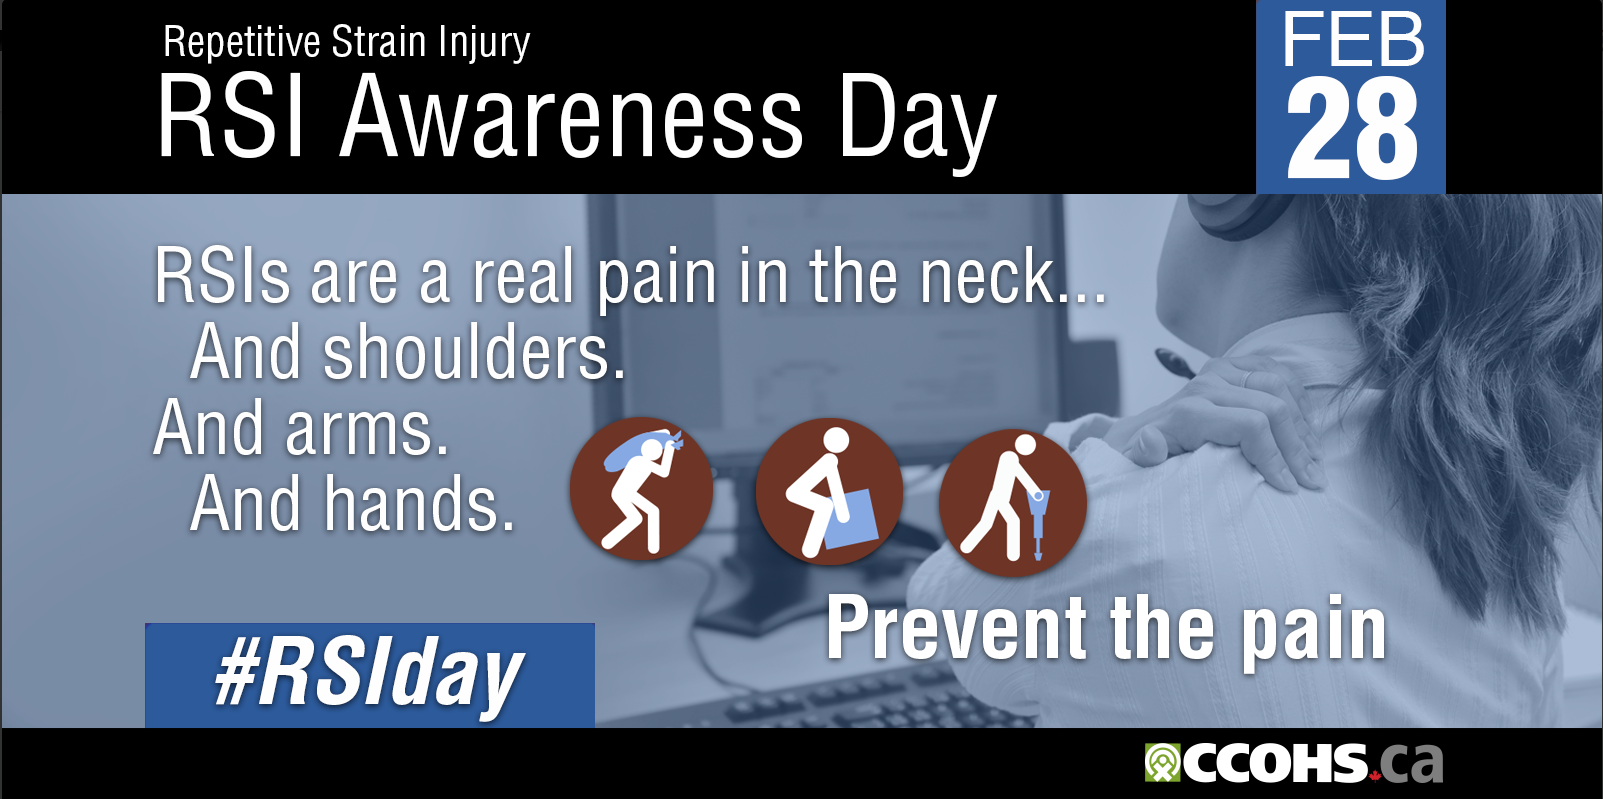 February 28 is Repetitive Strain Injury - RSI Awareness Day. RSIs are a real pain in the neck...And shoulders.
And arms. And hands. Prevent the pain. #RSIday. From CCOHS.ca